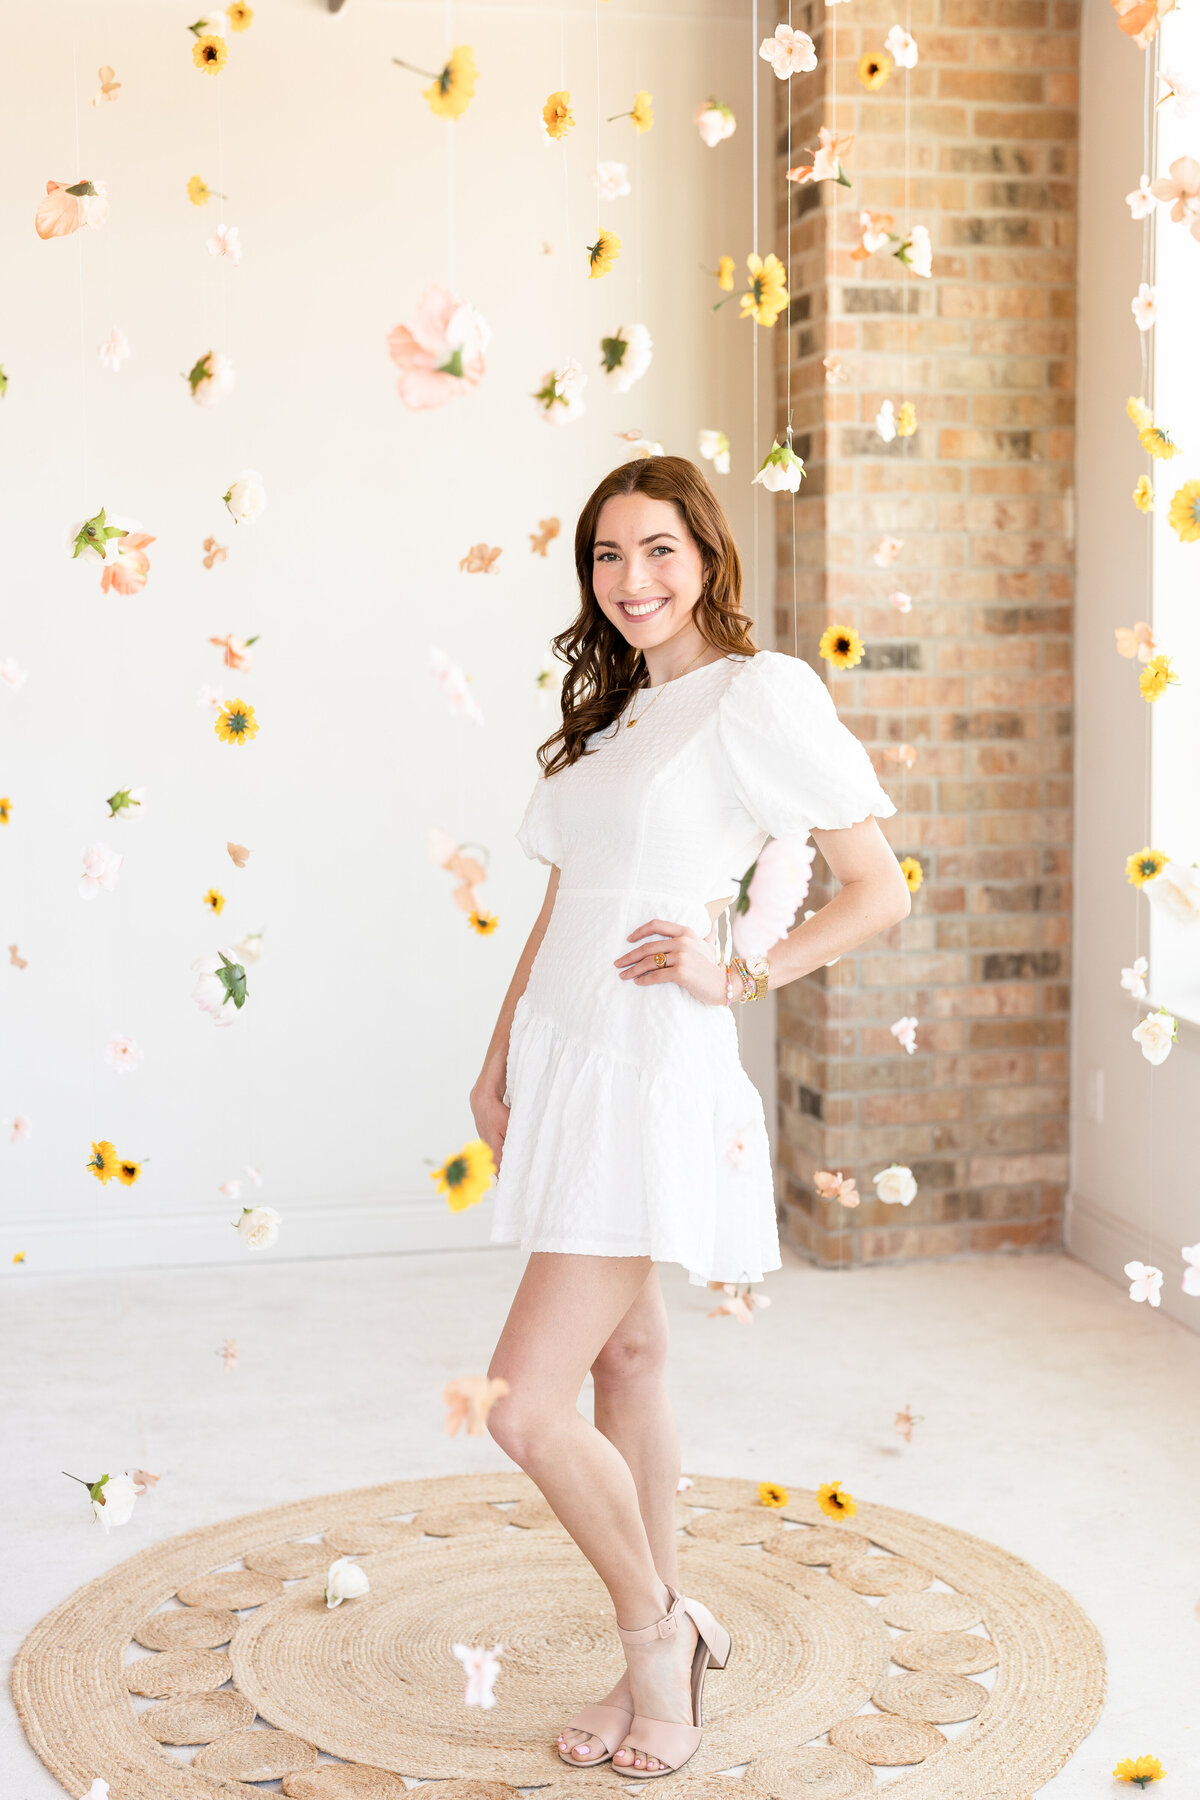 Texas A&M senior girl smiling with hand on hip while wearing white dress and in the middle of hanging flowers at Bravely Studio